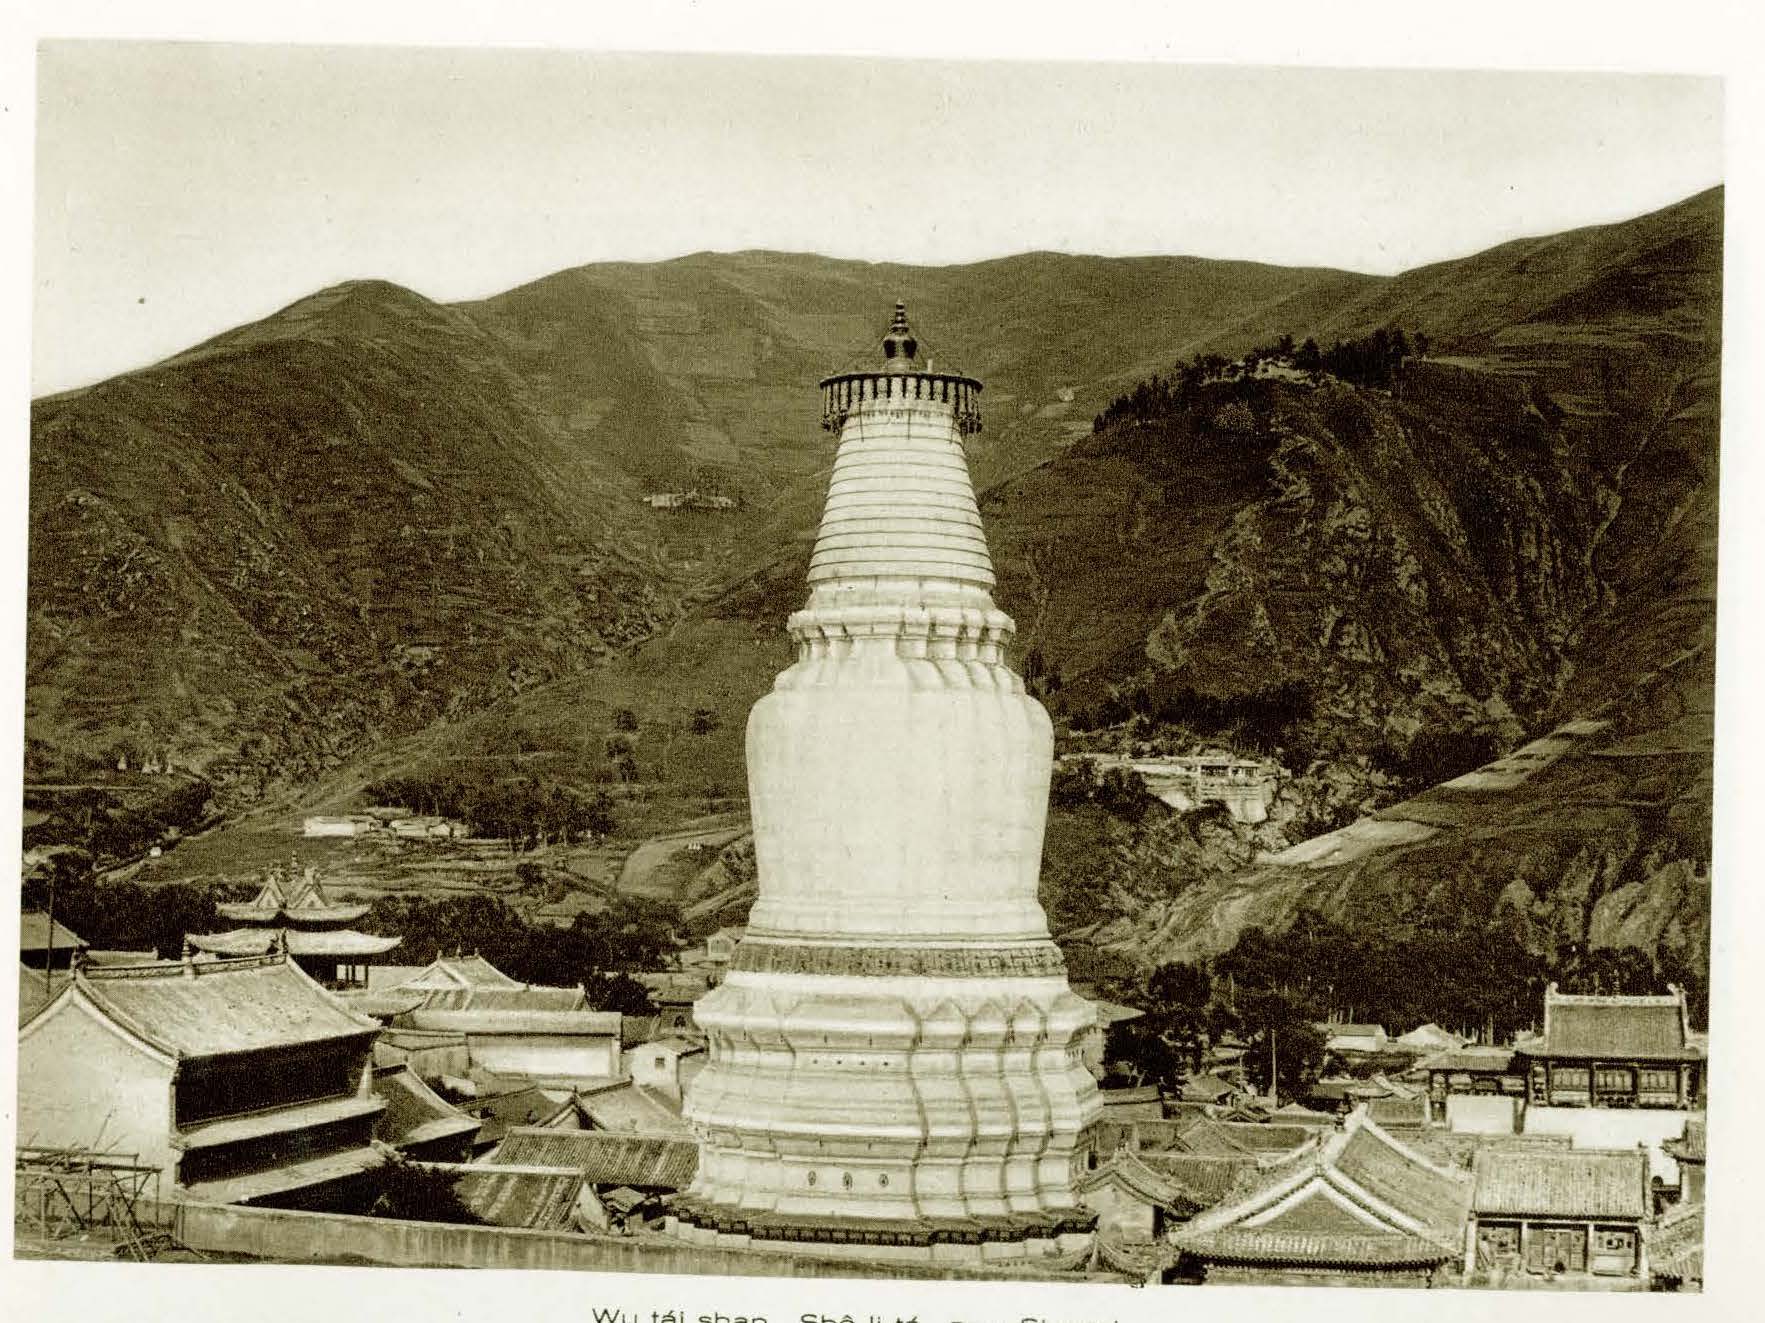 Full view sepia photograph of tall white stupa against background of gently sloping mountains